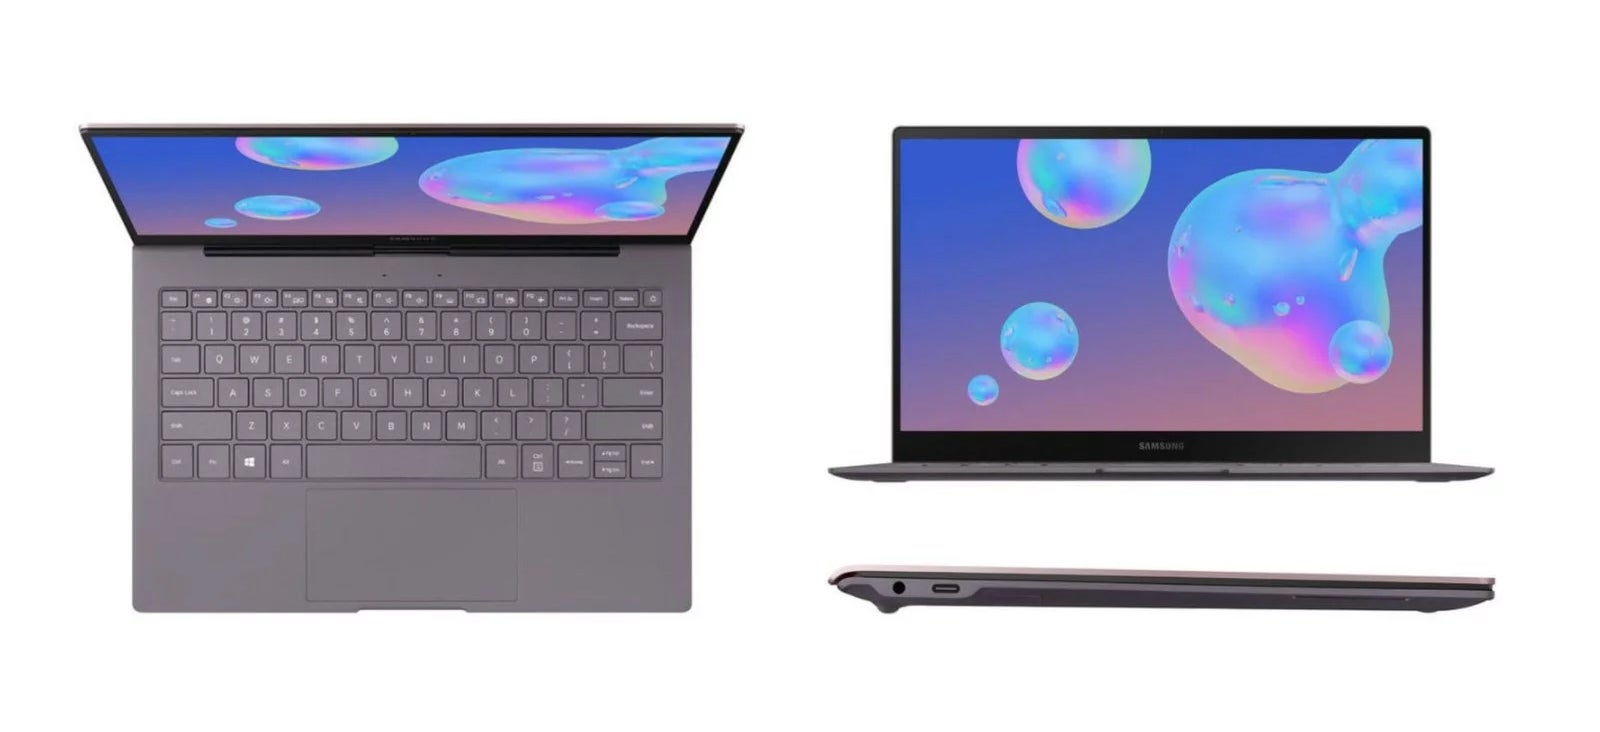 Samsung Galaxy Book S is a new breed of laptop powered by a Snapdragon processor and LTE